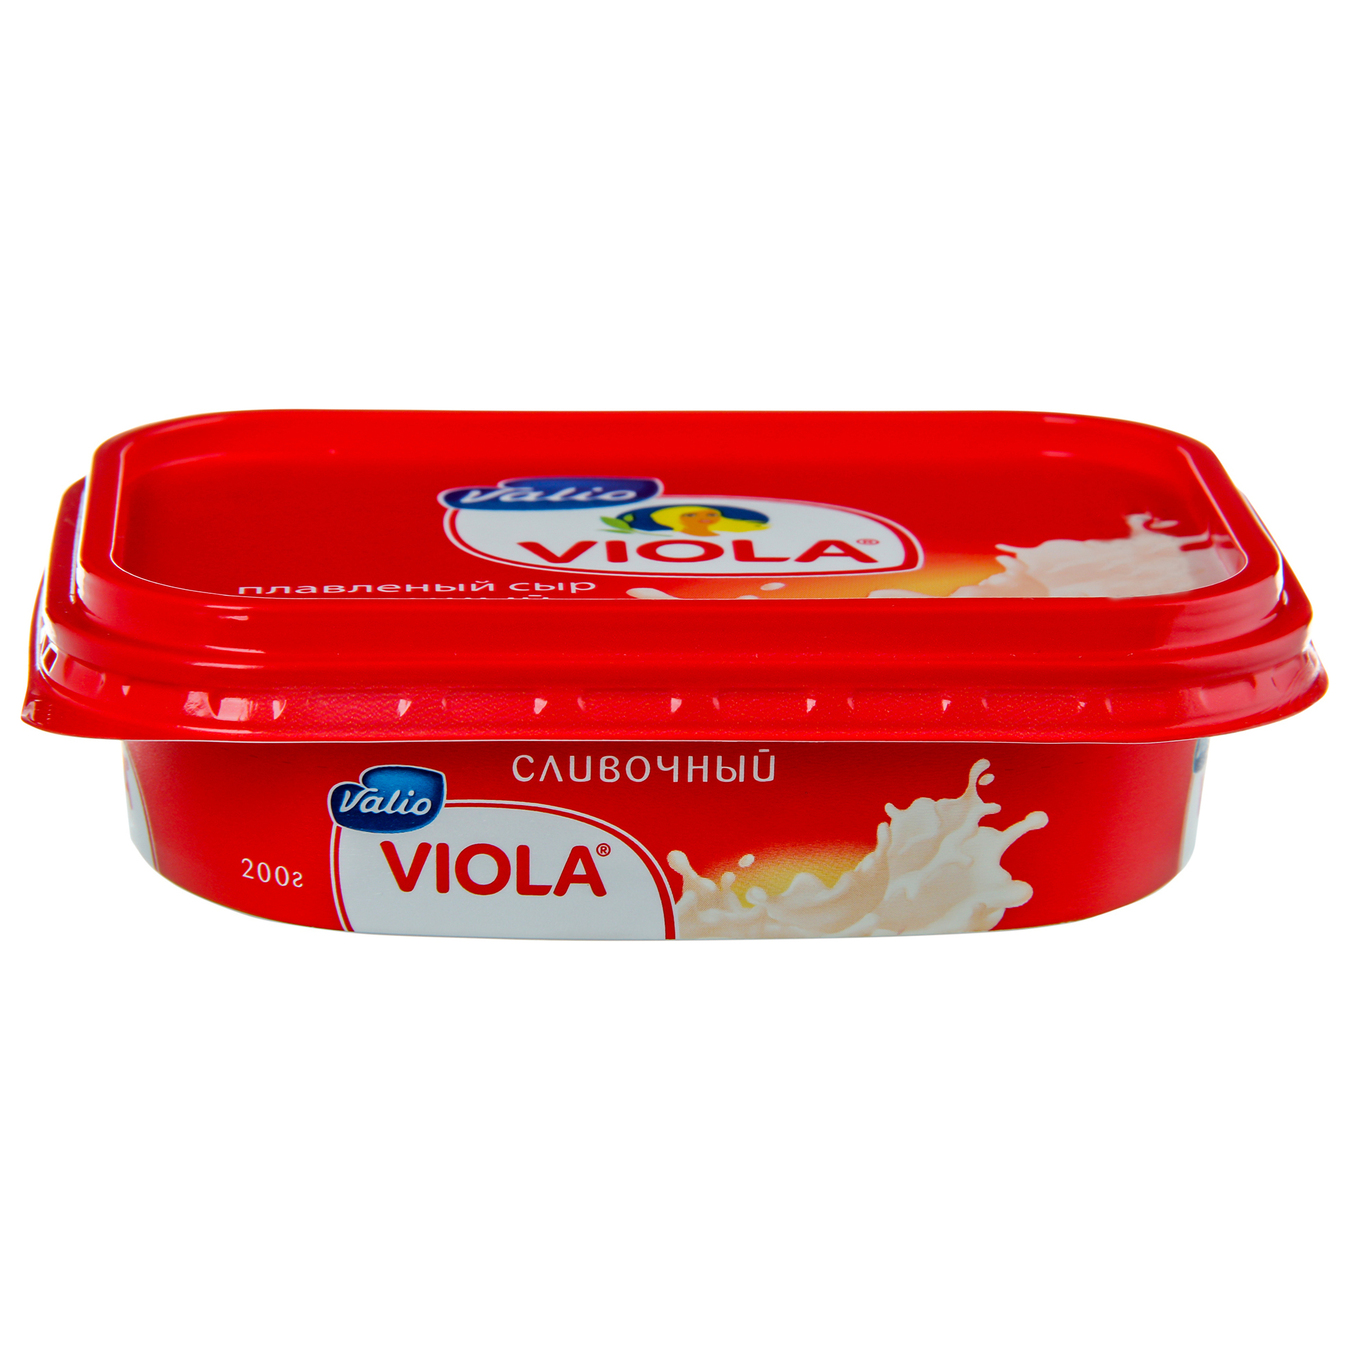 Viola Cheese Creamy melted 0,6 200g